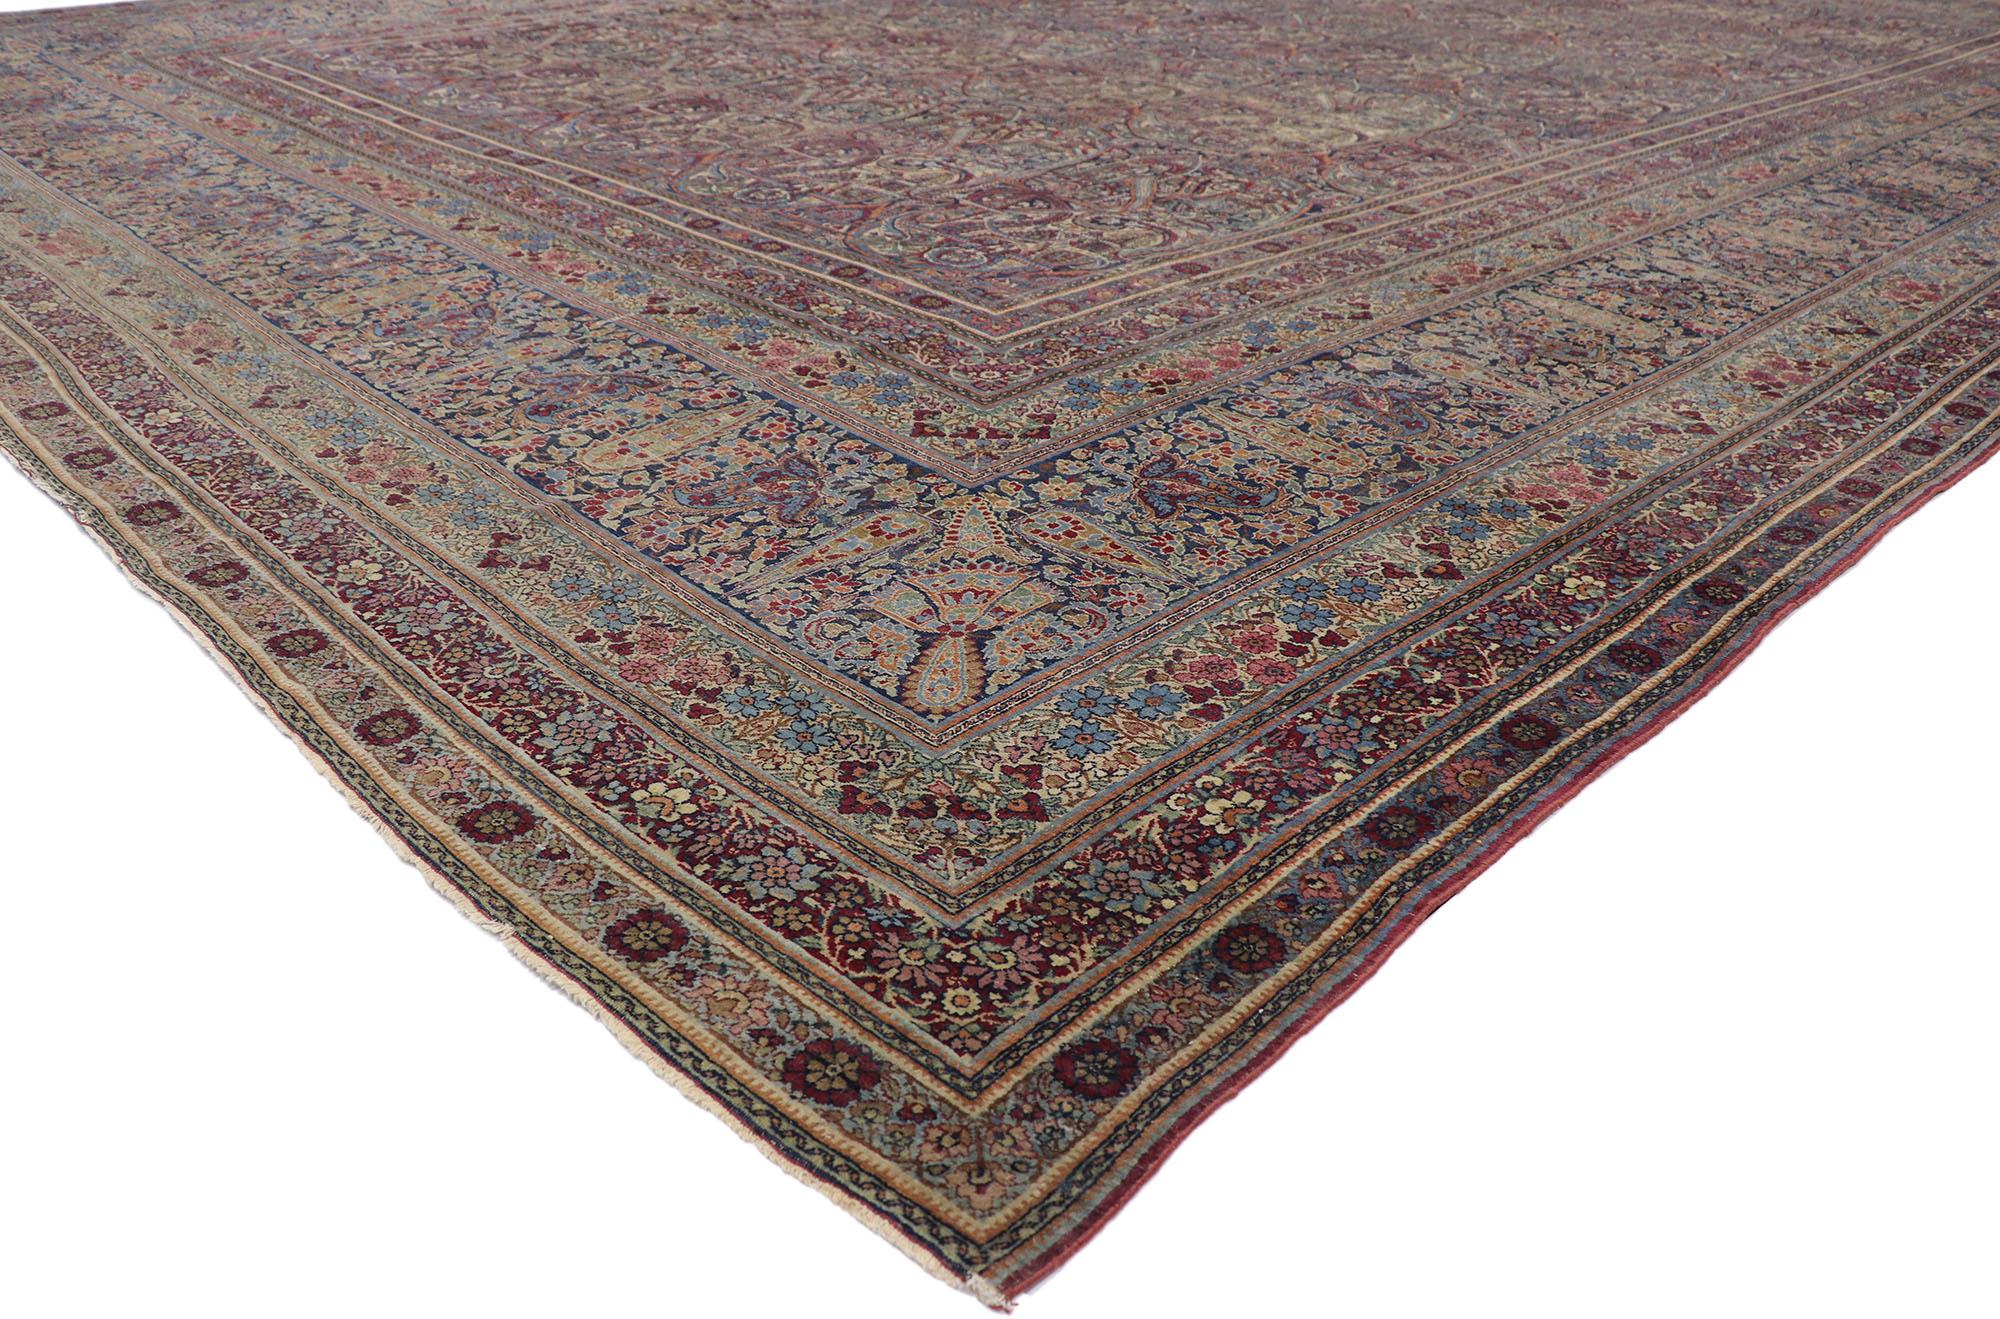 77622 distressed antique Persian Lavar Kerman rug with Rustic English Country style. Full of tiny details and a boteh paisley design combined with time-softened colors, this hand-knotted wool distressed antique Persian Lavar Kerman rug is a